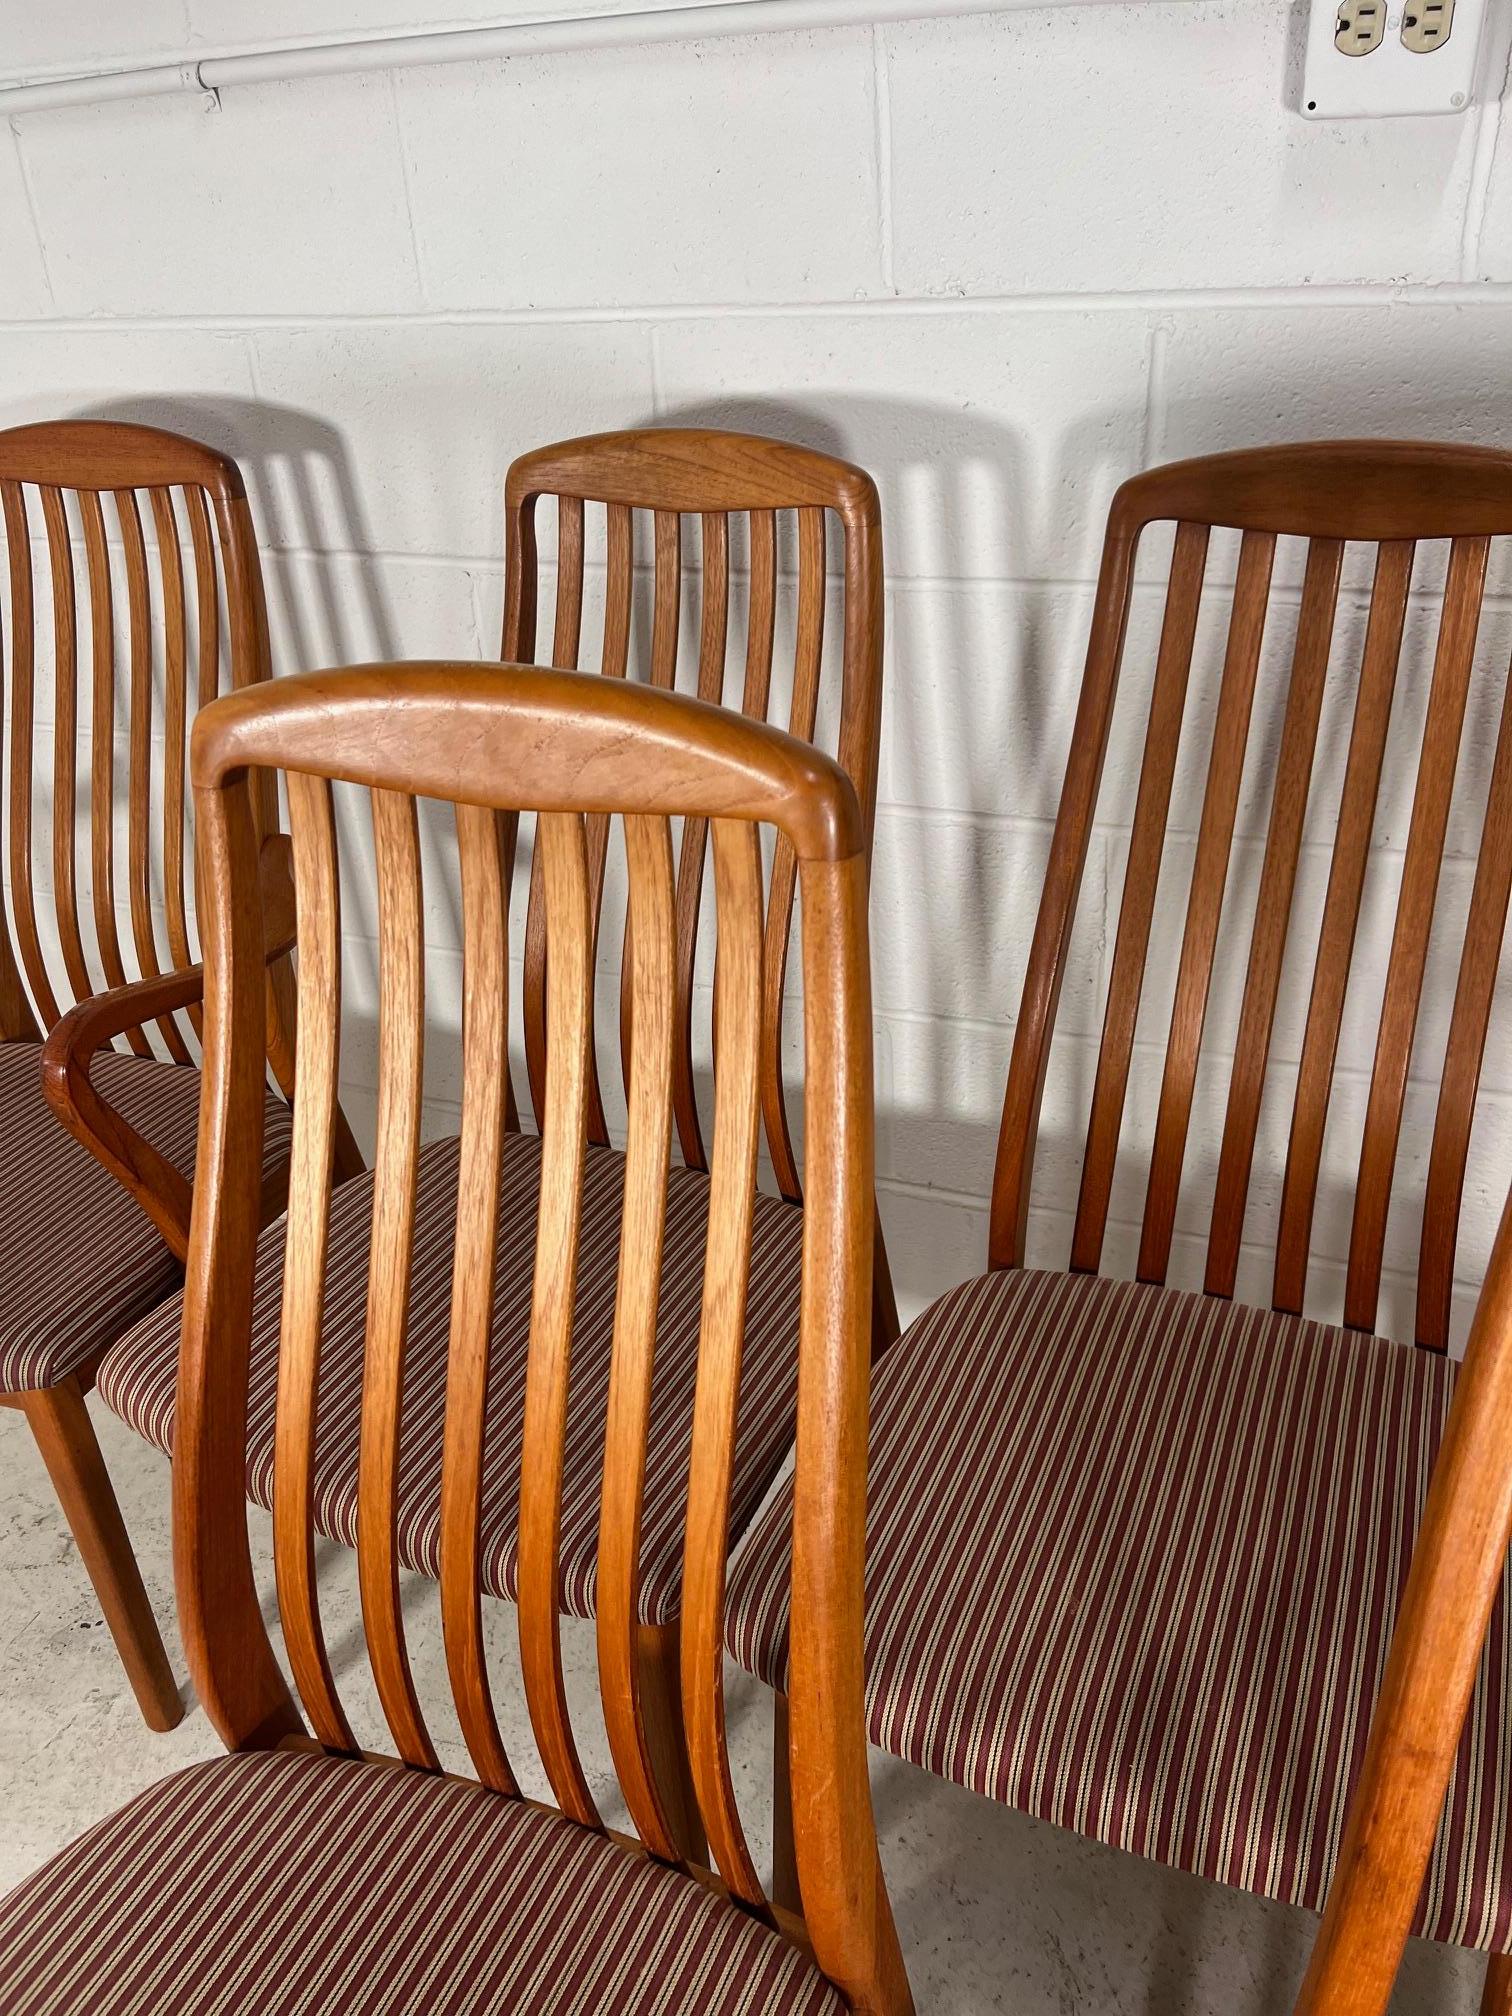 Fantastic set of 6 teak dining chairs by Schou Andersen. Made in Denmark.

Including two with arms. Excellent condition. Minor marks on the teak frames. Very sturdy. Small spot on one of the seats. Scratch on the top of the back rest on one